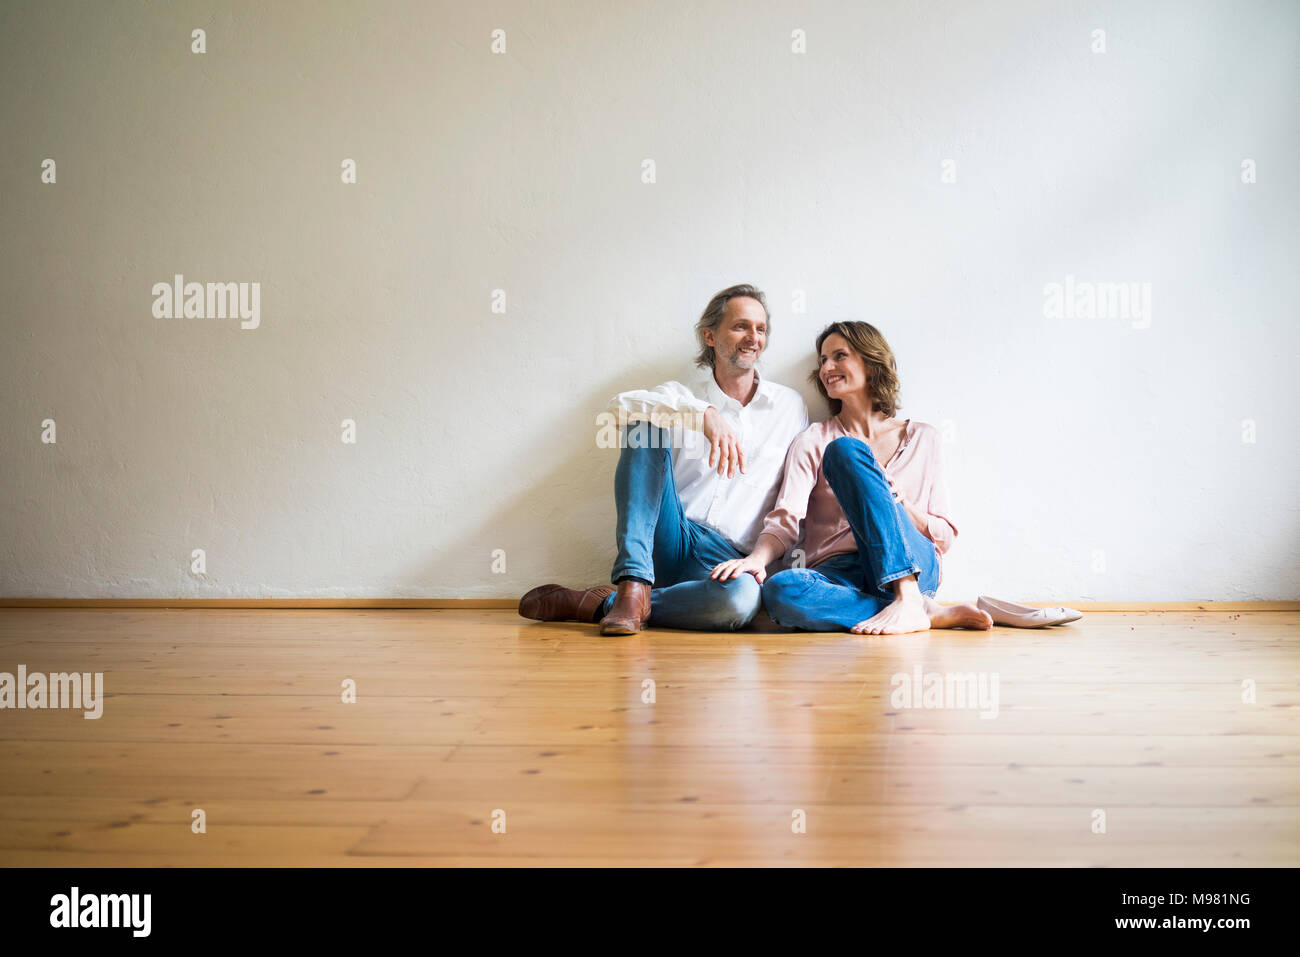 Smiling mature couple sitting on floor in empty room Stock Photo